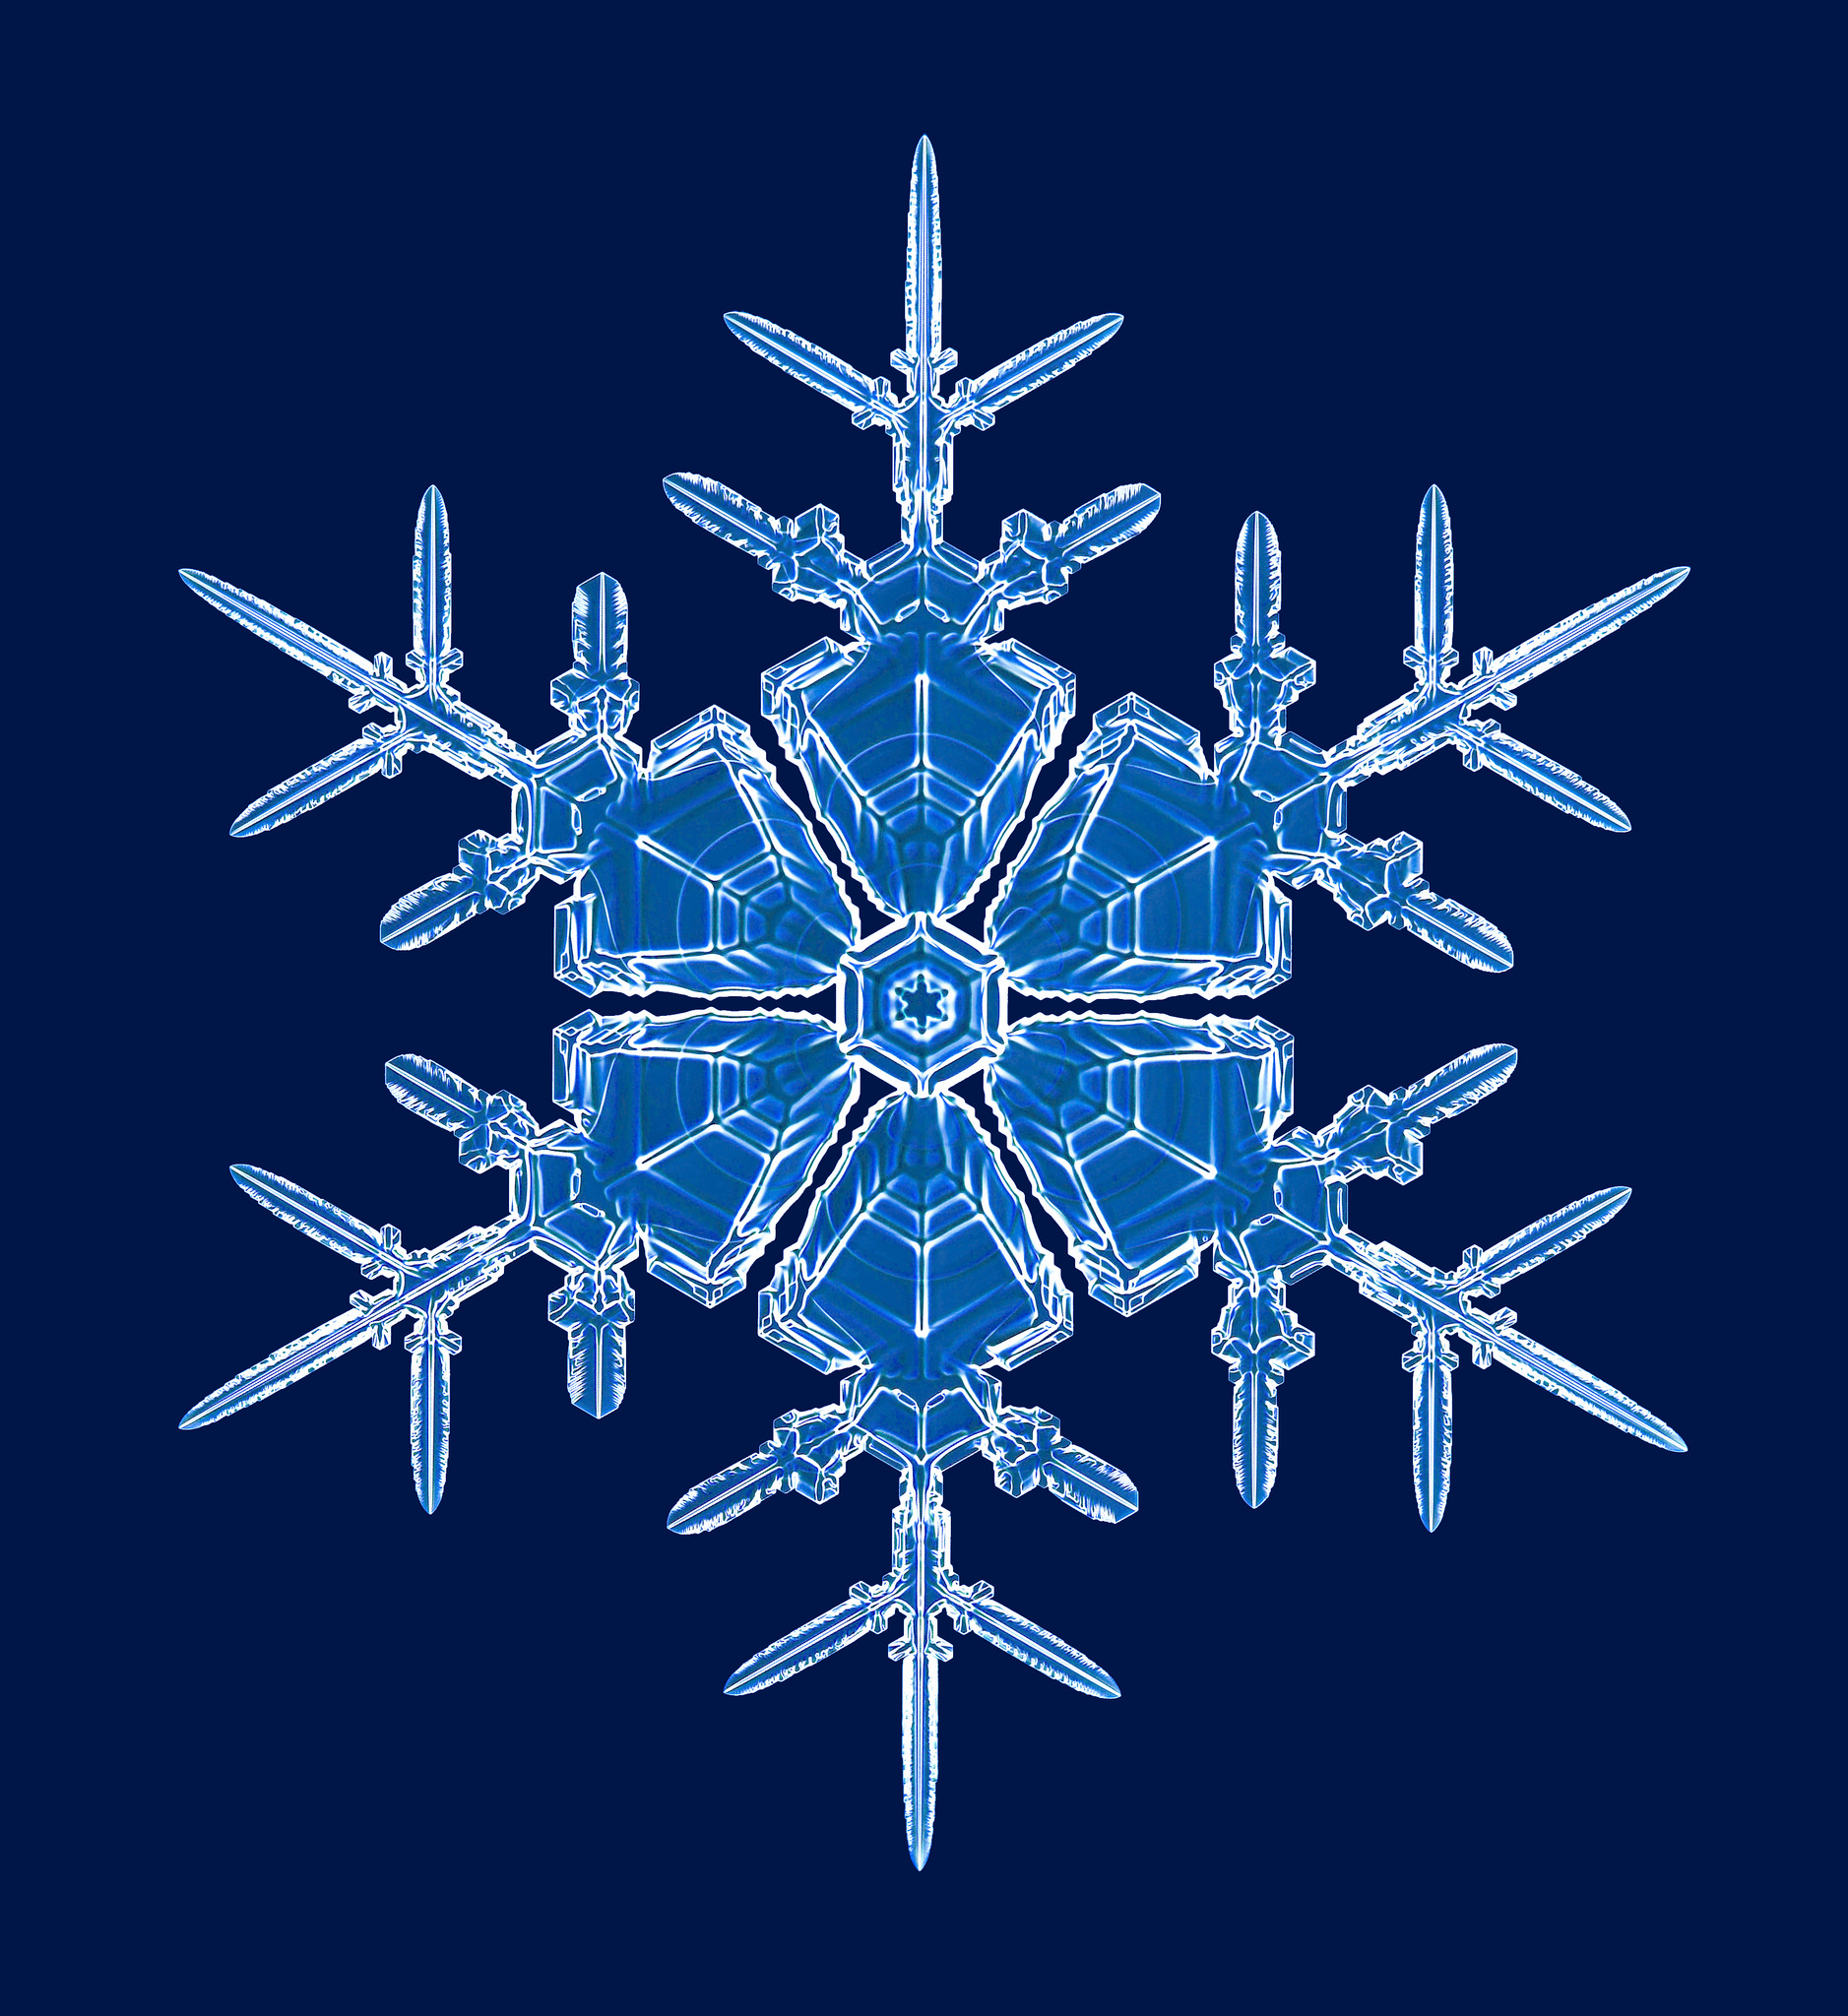 Kenneth Libbrecht: Photographing Lab-Made Snowflakes